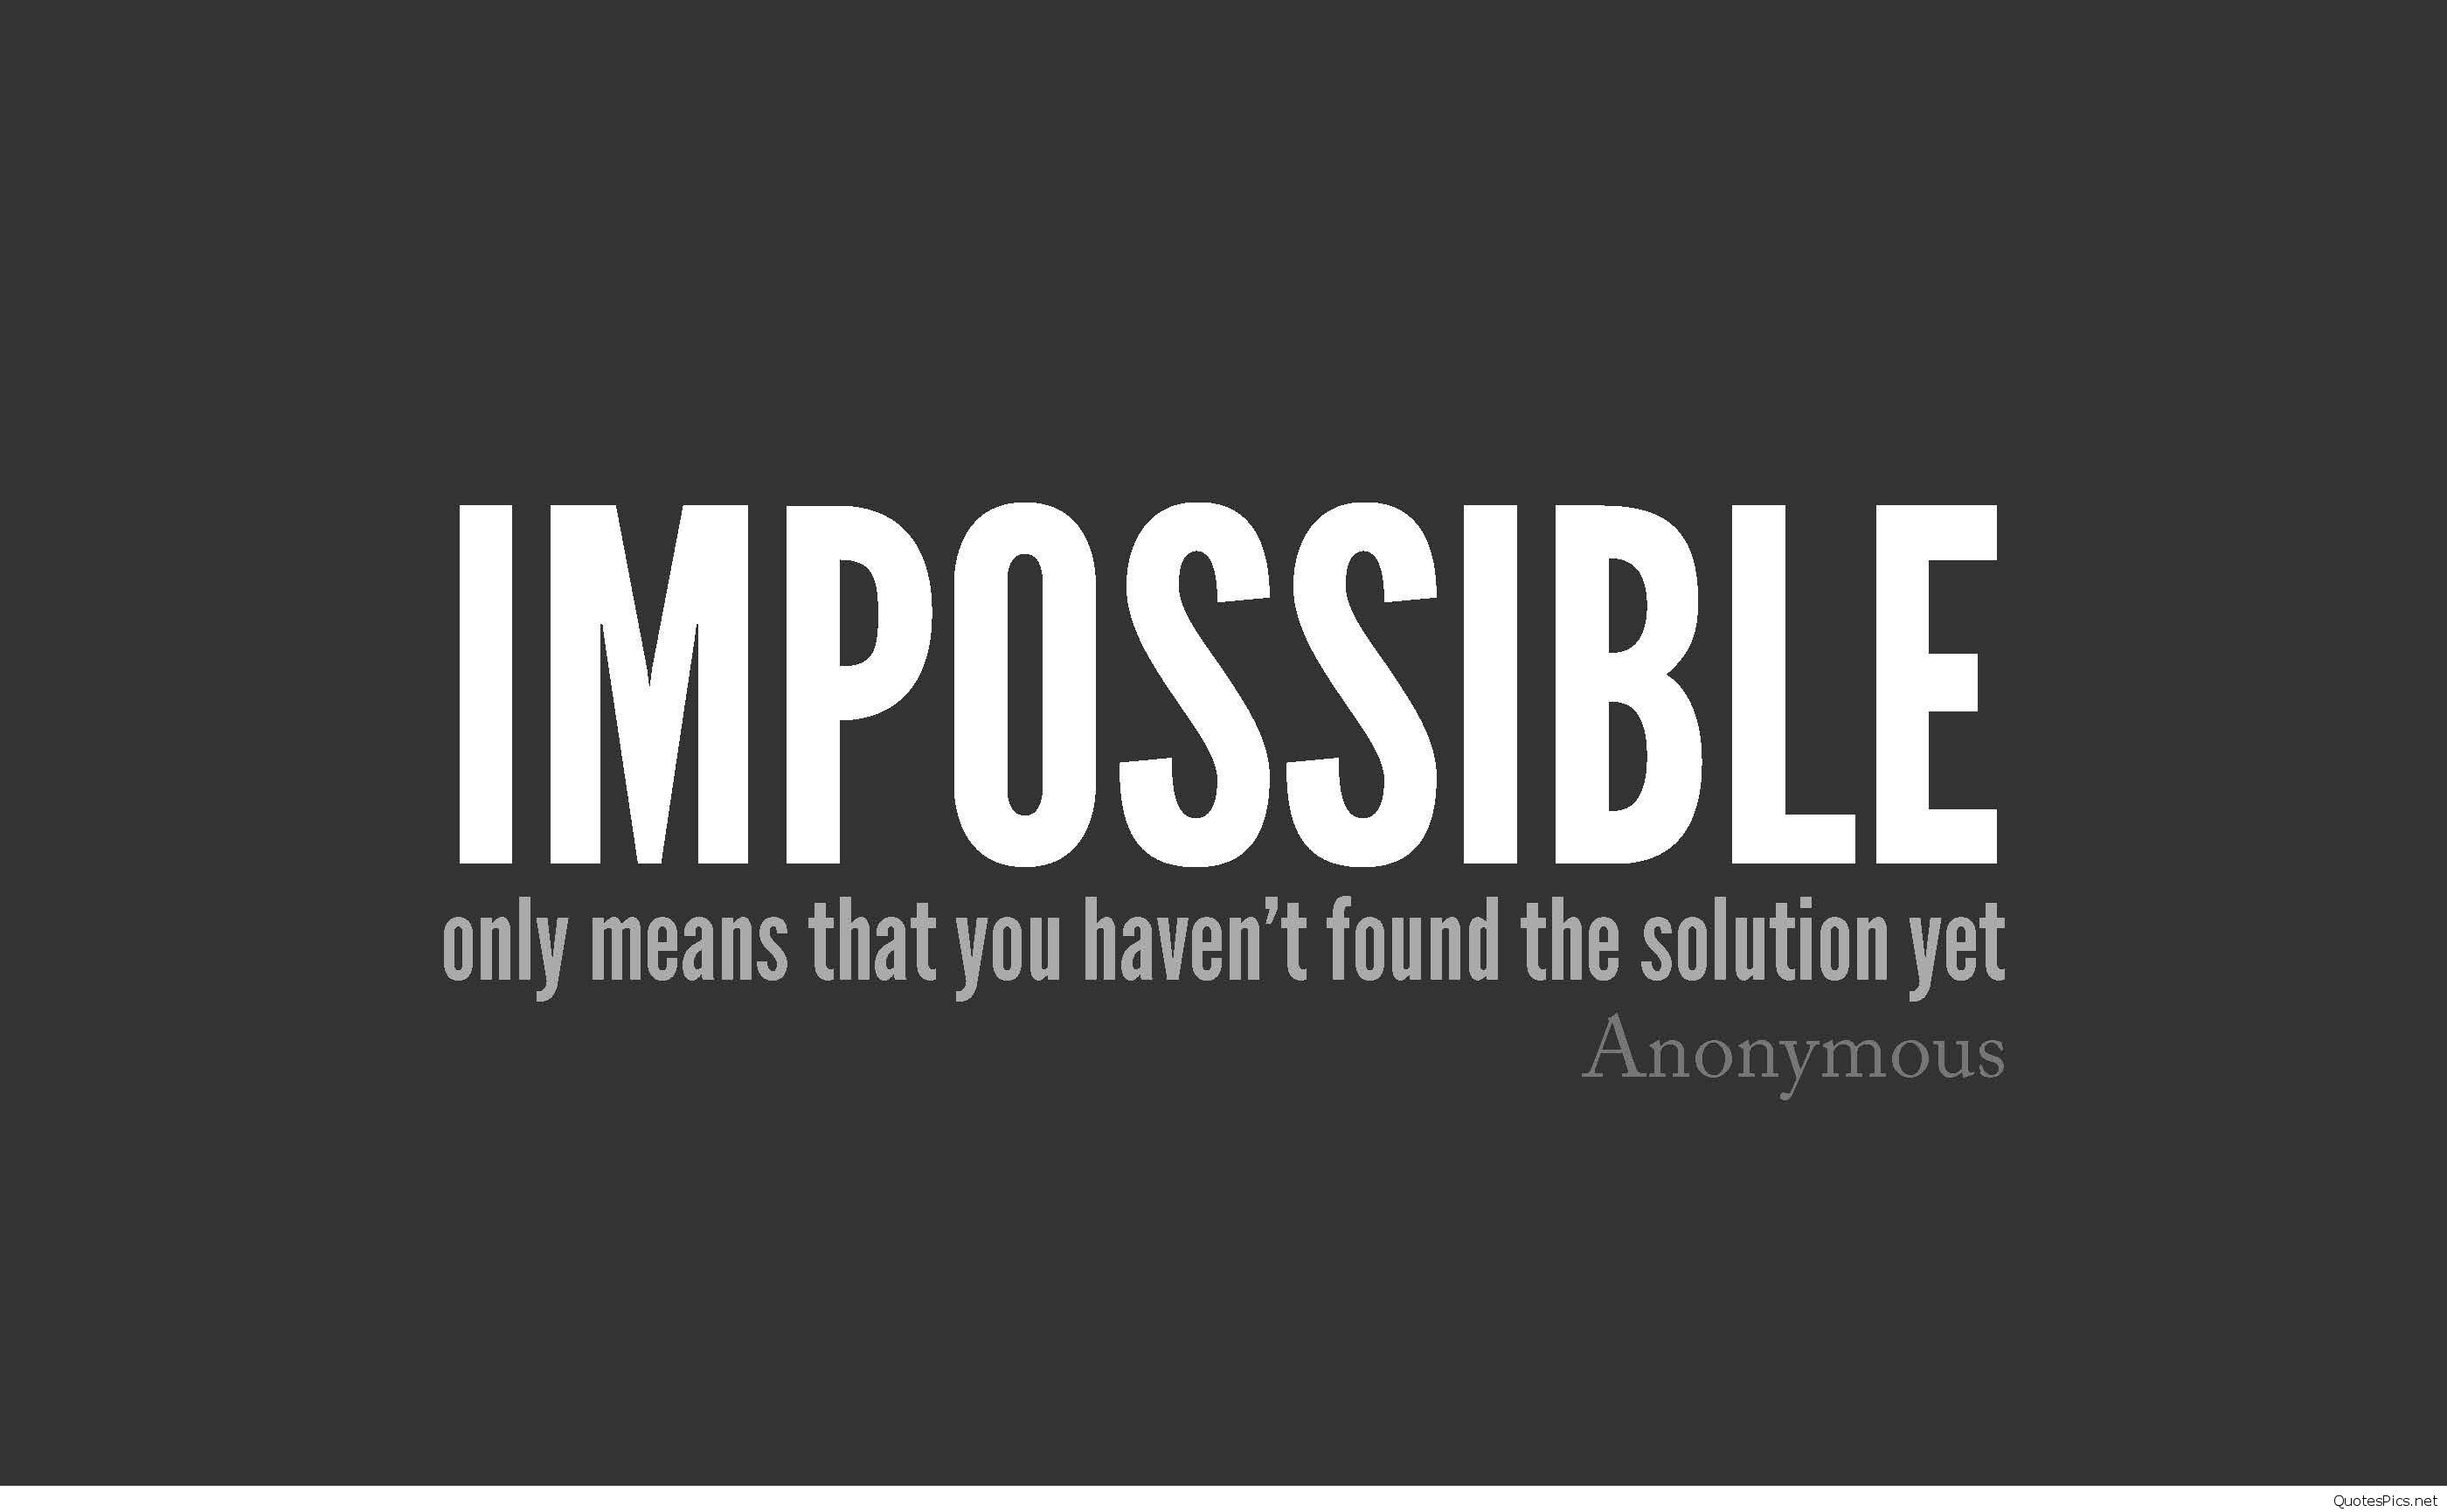 2800x1730 Impossible only means that you haven't found the solution yet